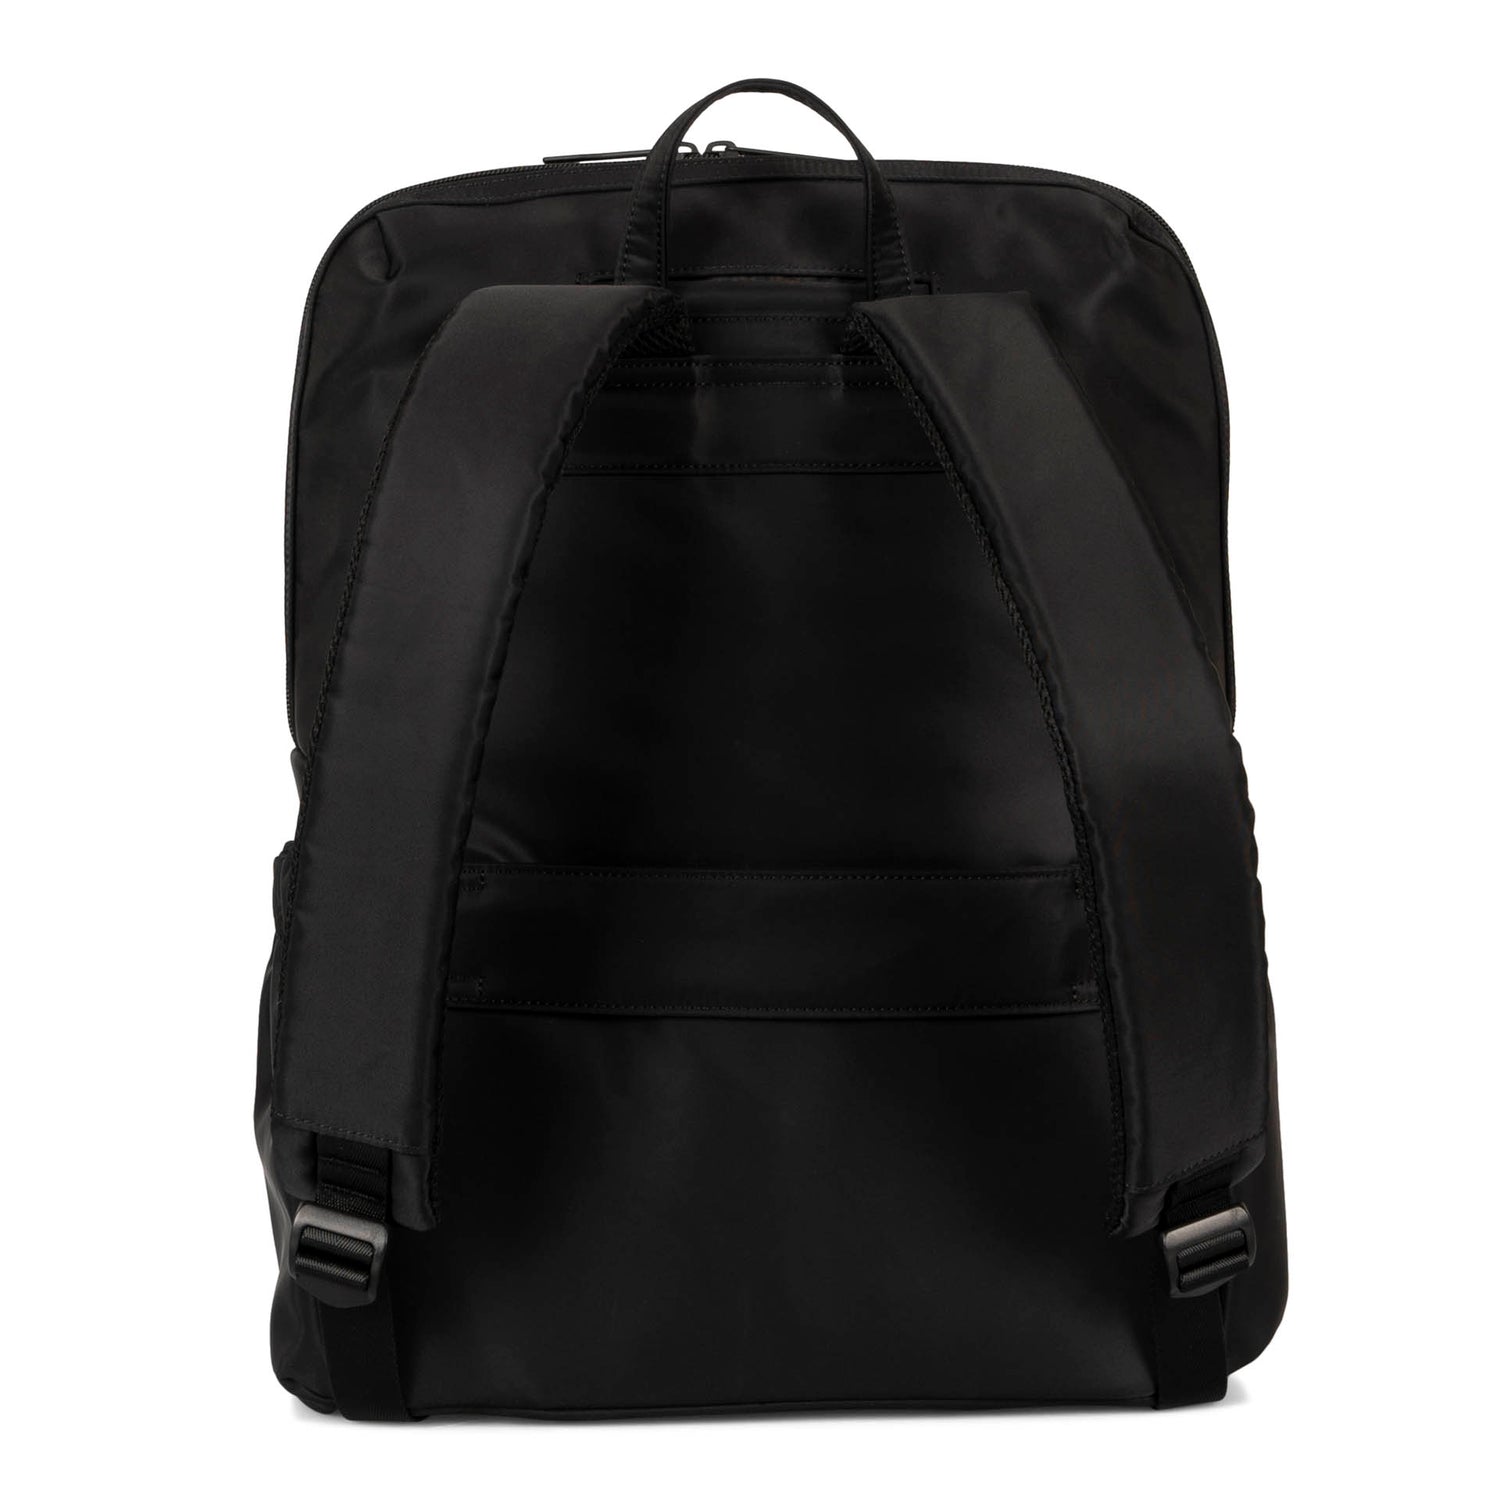 Clinton Business Backpack